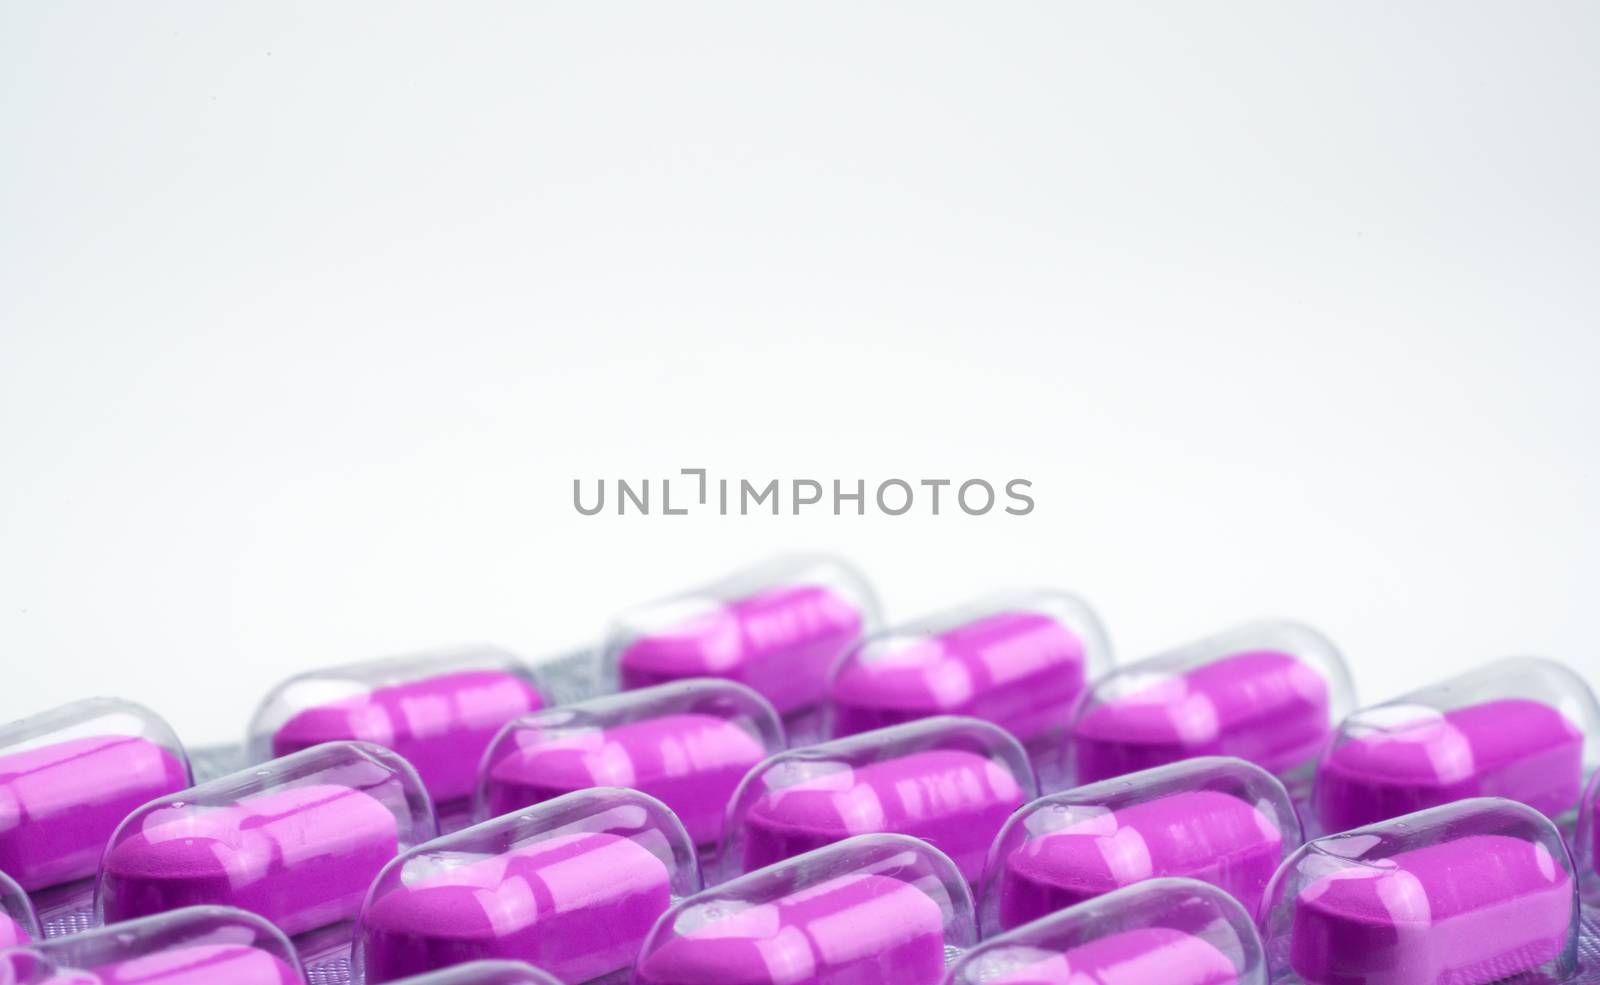 Macro shot of purple caplets pills in blister pack on white background. Mild to moderate pain management. Pain killer medicine. Pills for treatment heart broken concept. NSAIDs. Pharmaceutical packaging industry. Pharmacy background. Global healthcare concept.